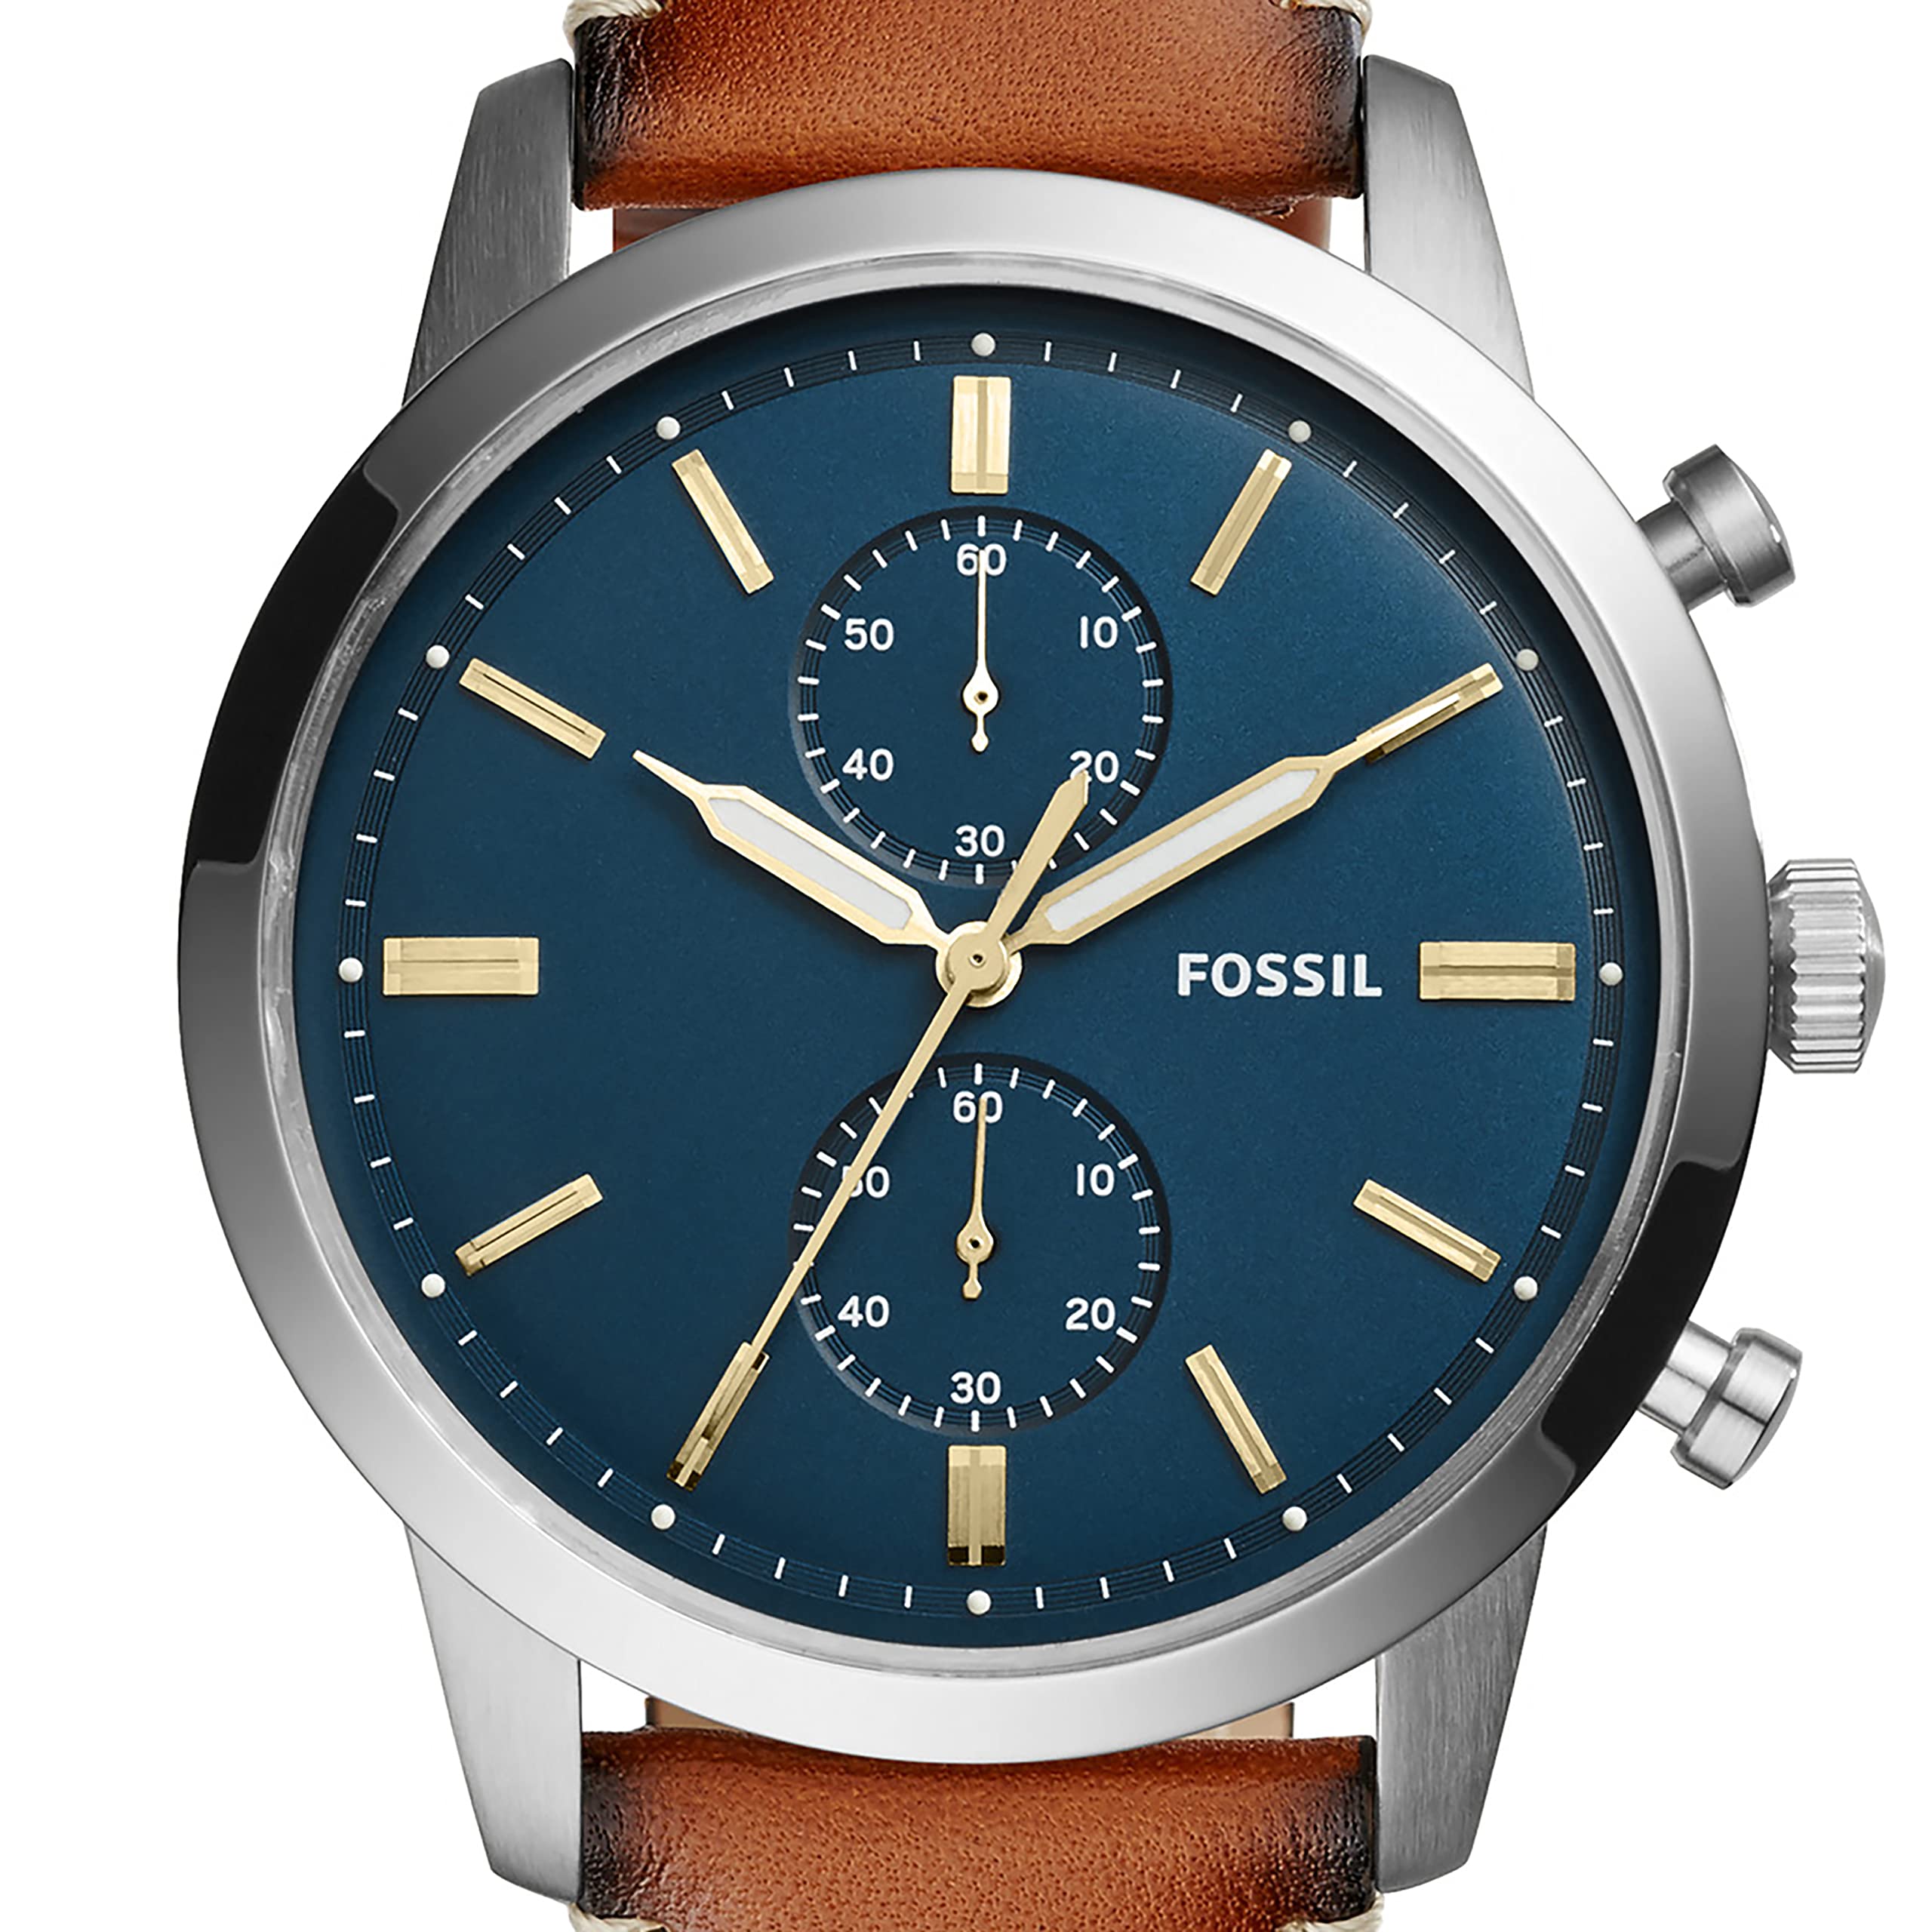 Fossil Townsman Men's Watch with Chronograph Display and Genuine Leather Band